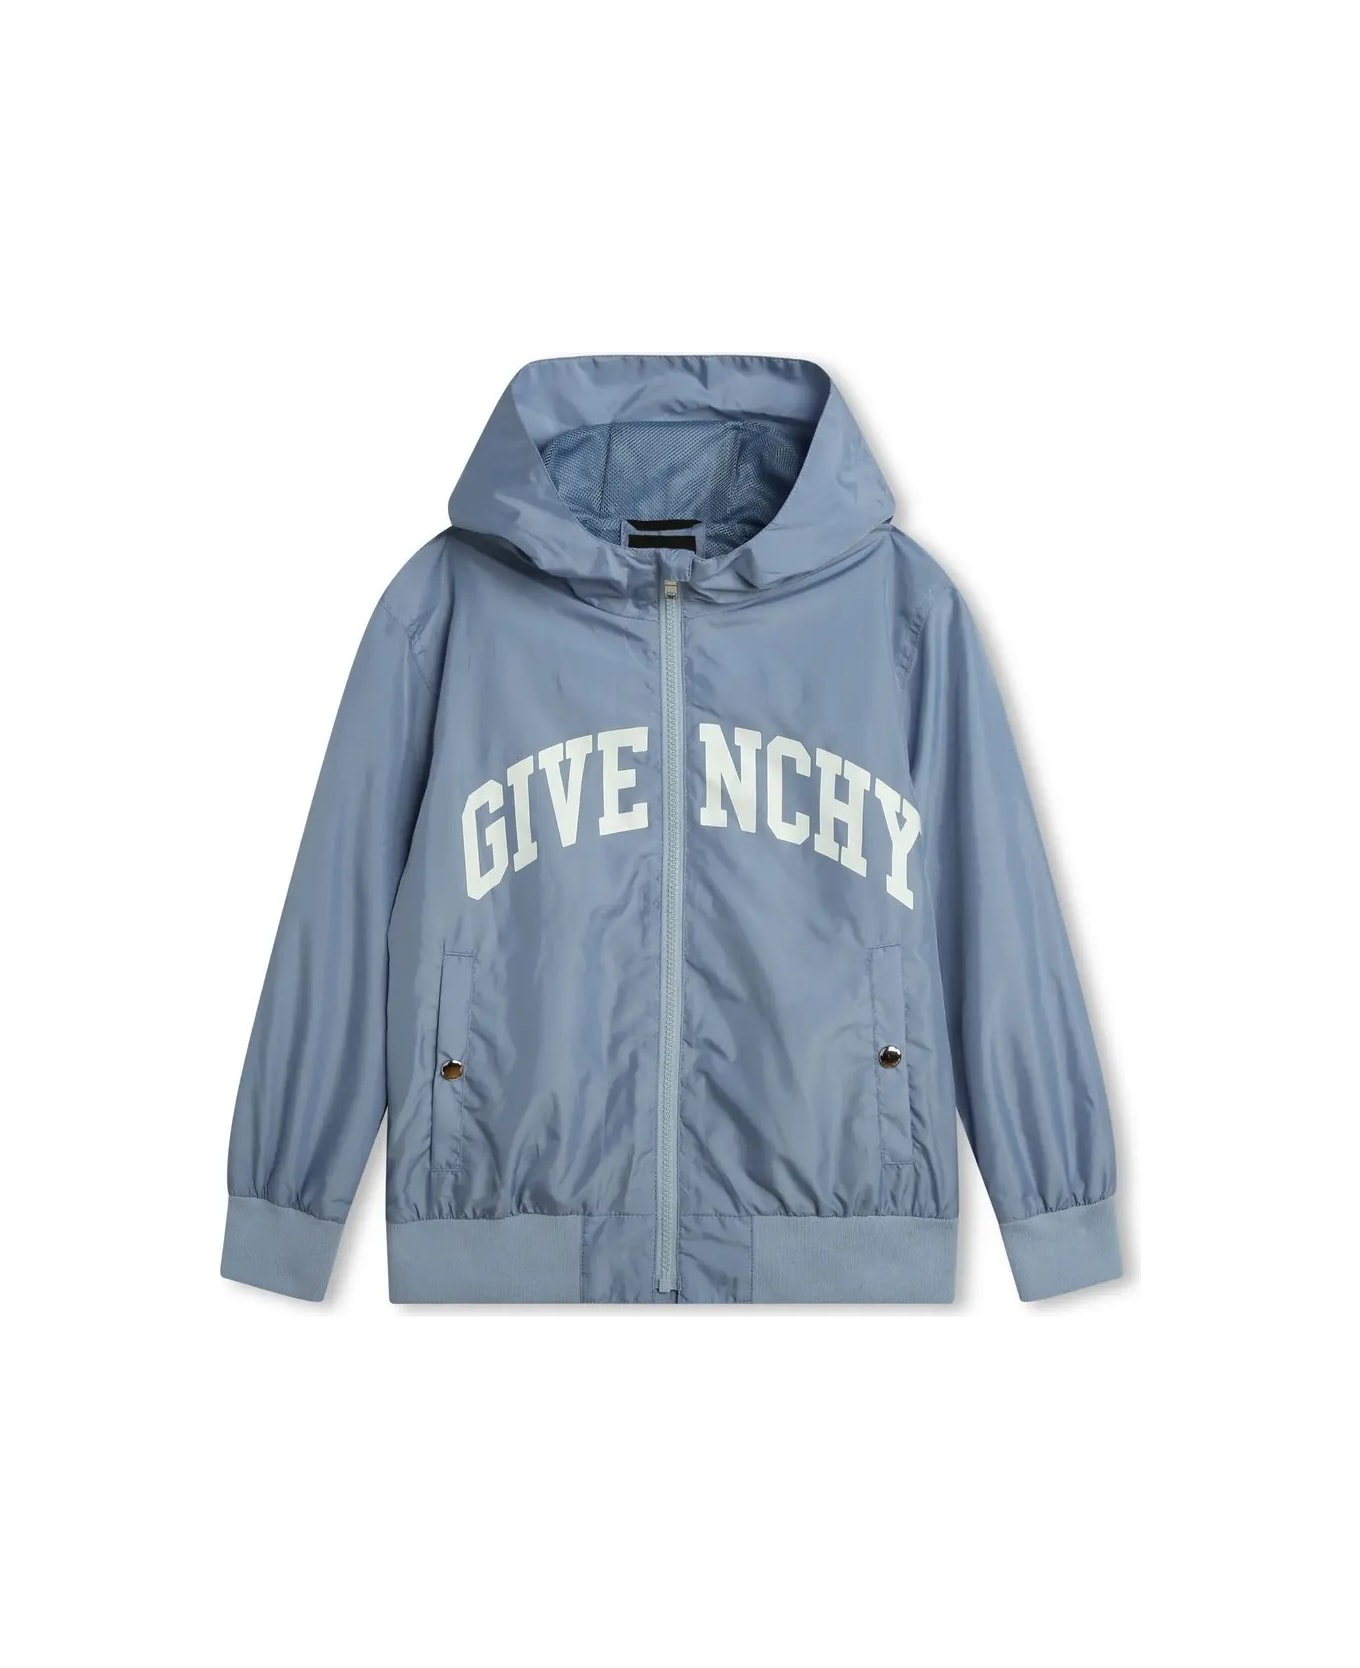 Givenchy Light Blue Givenchy Windbreaker With Zip And Hood - Blue